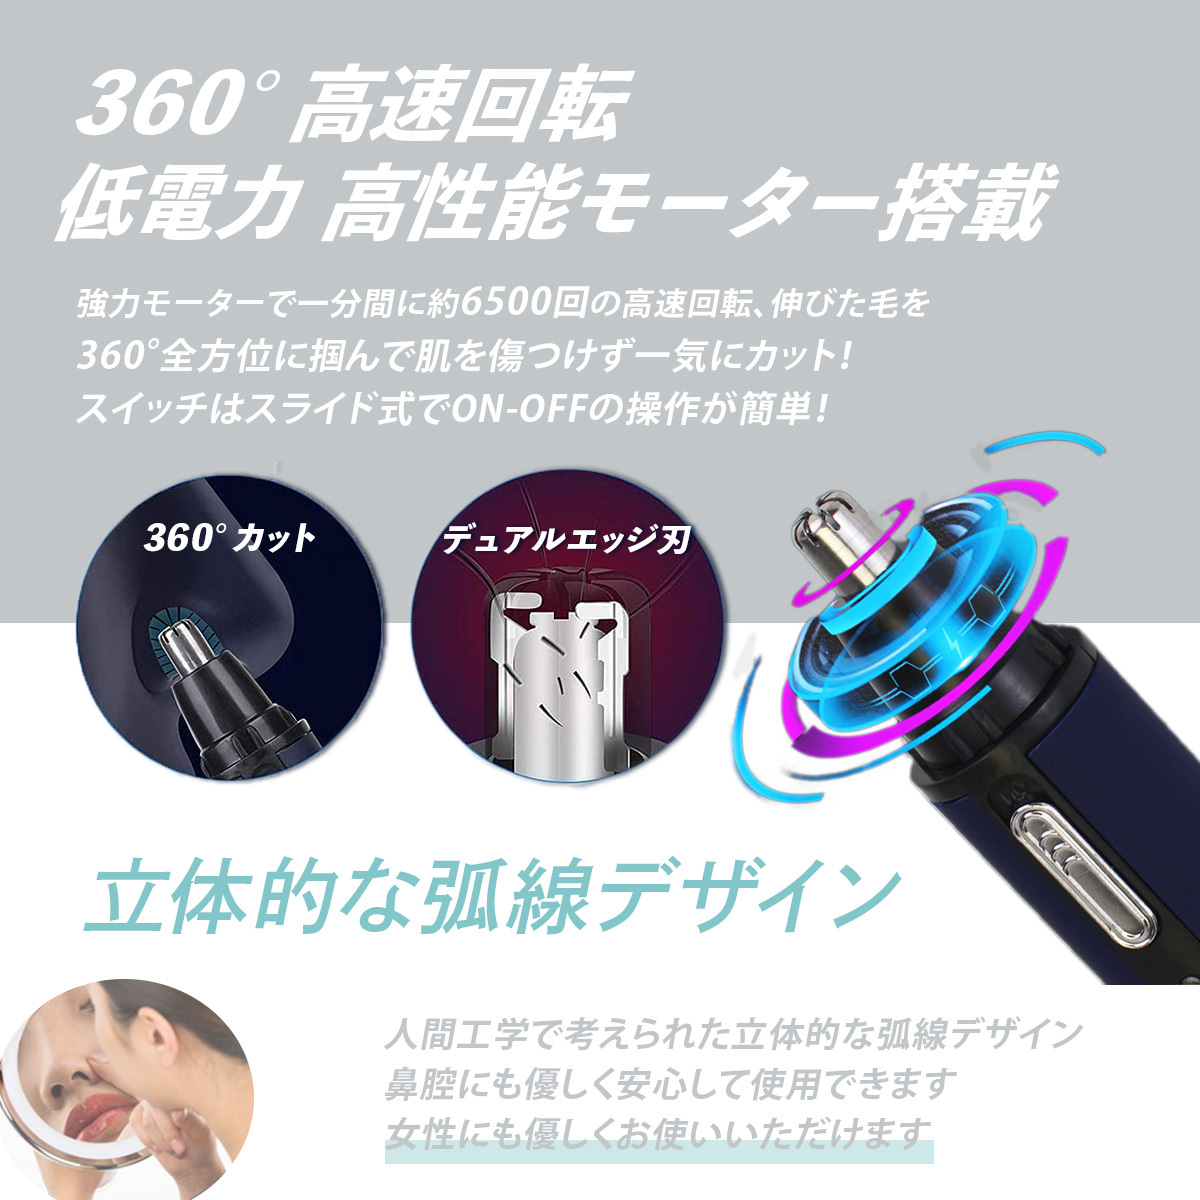  nasal hair cutter rechargeable USB washing with water OK. wool ear wool ... convenient compact design 